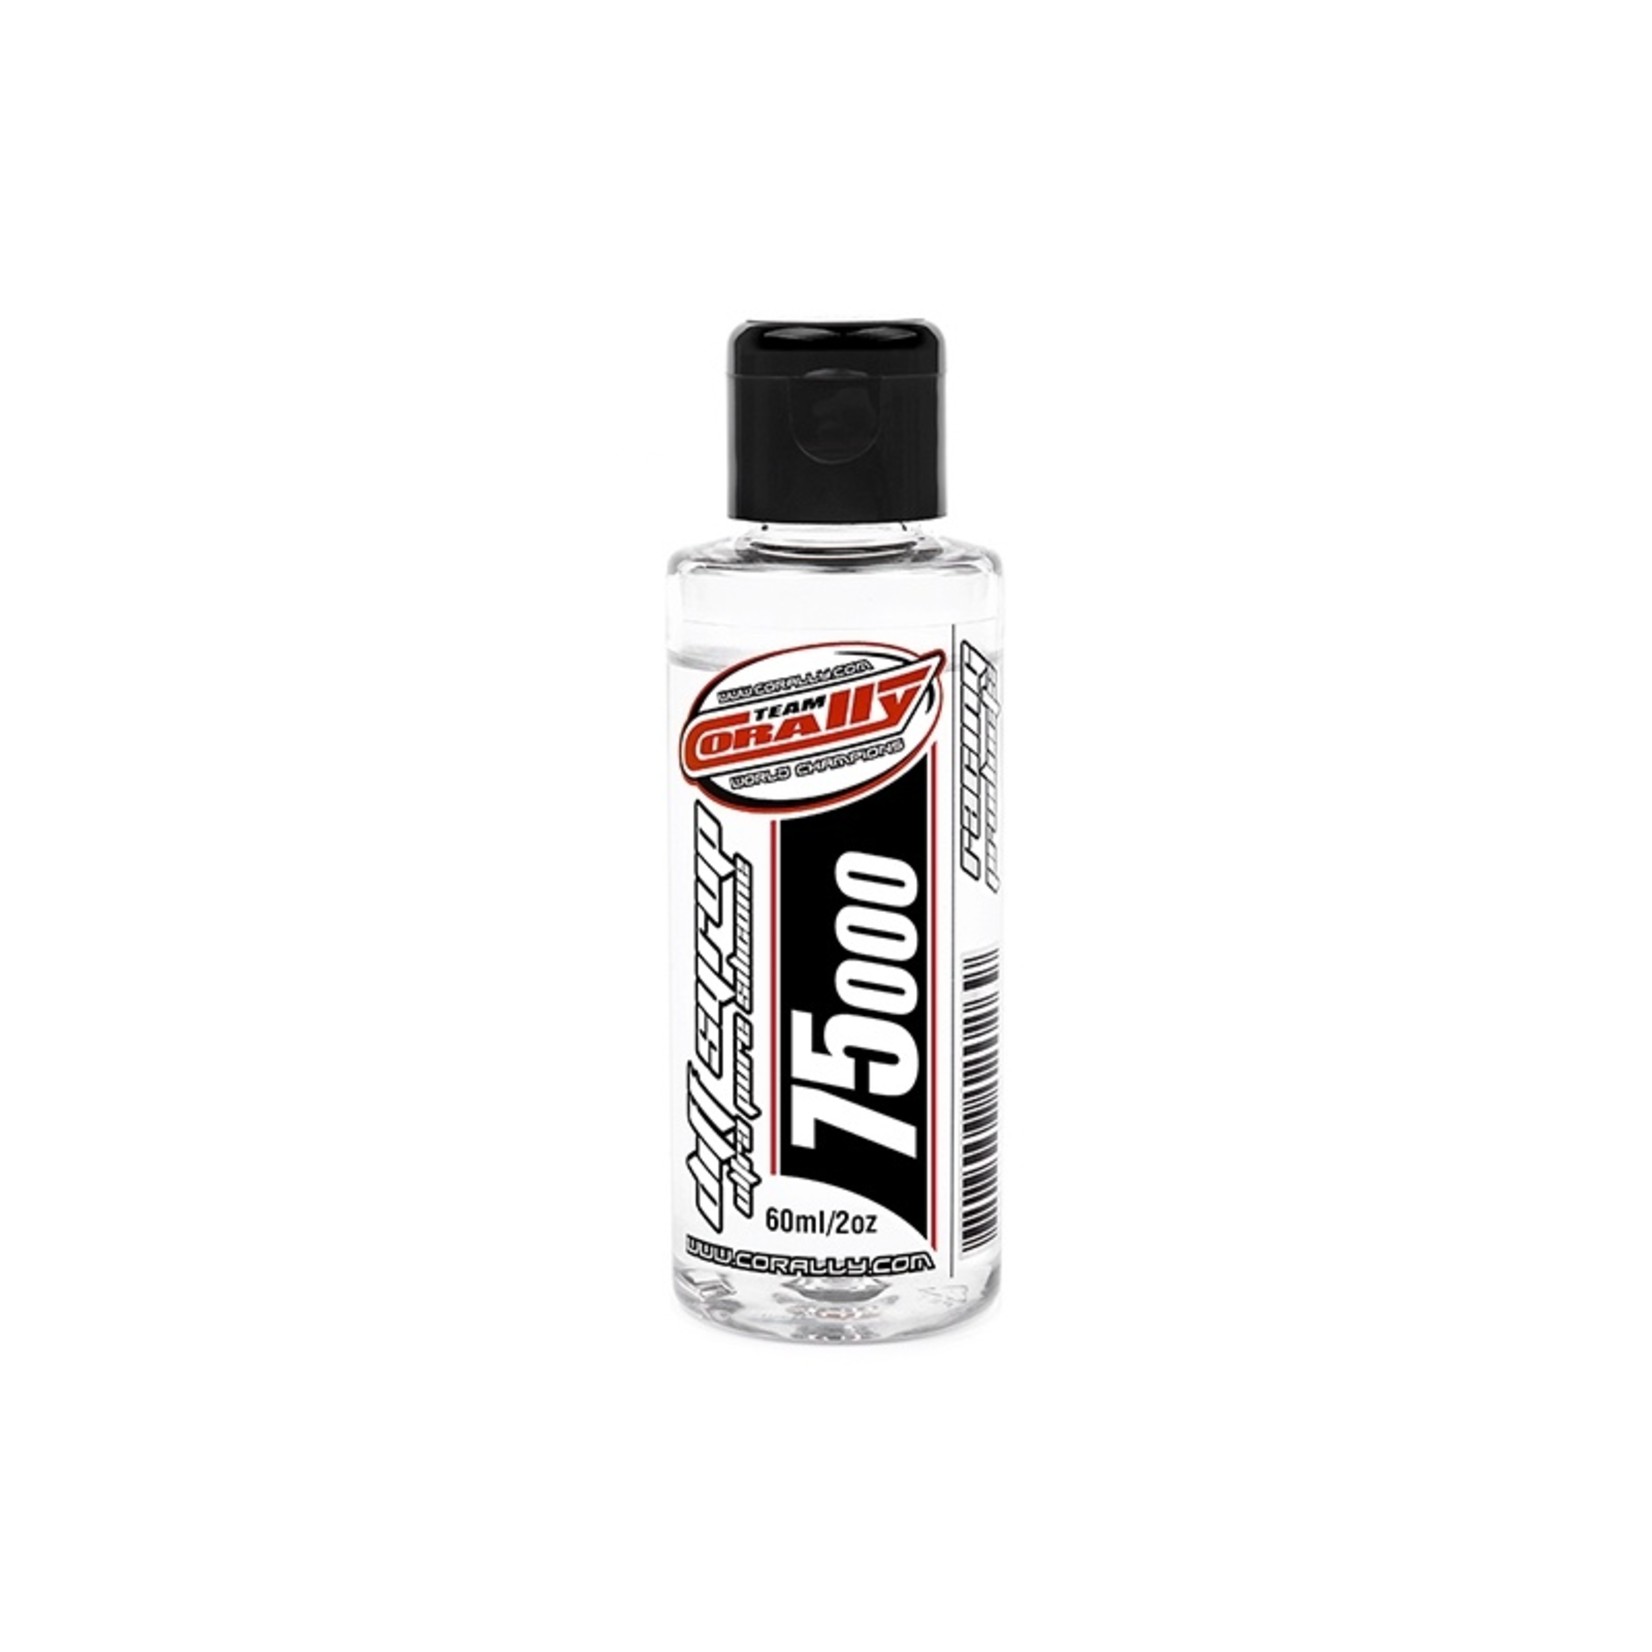 Corally (Team Corally) Ultra Pure Silicone Diff Syrup - 75000 CPS - 60ml